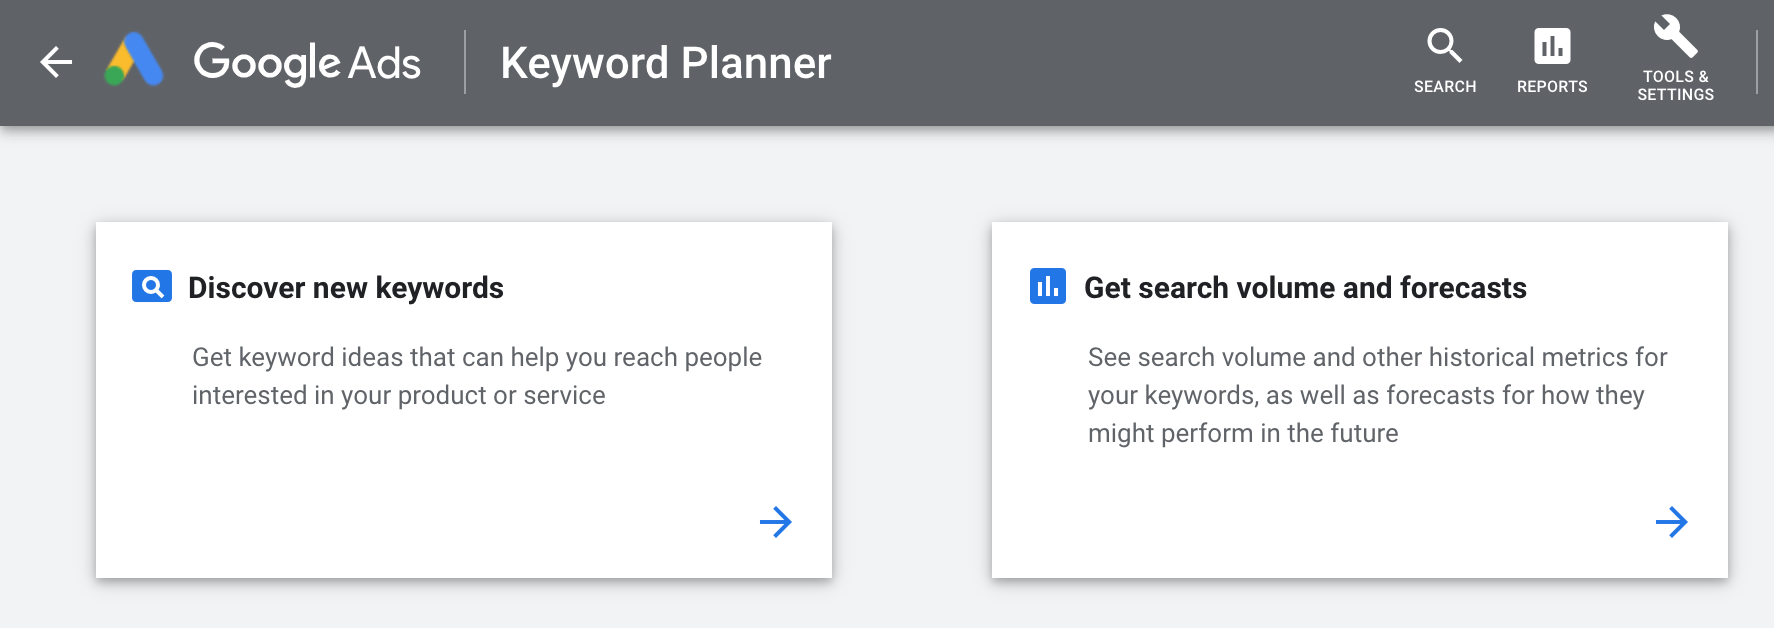 Use Google Keyword Planner to get estimated search volumes. Note that these volumes are based on Google Search, not YouTube.